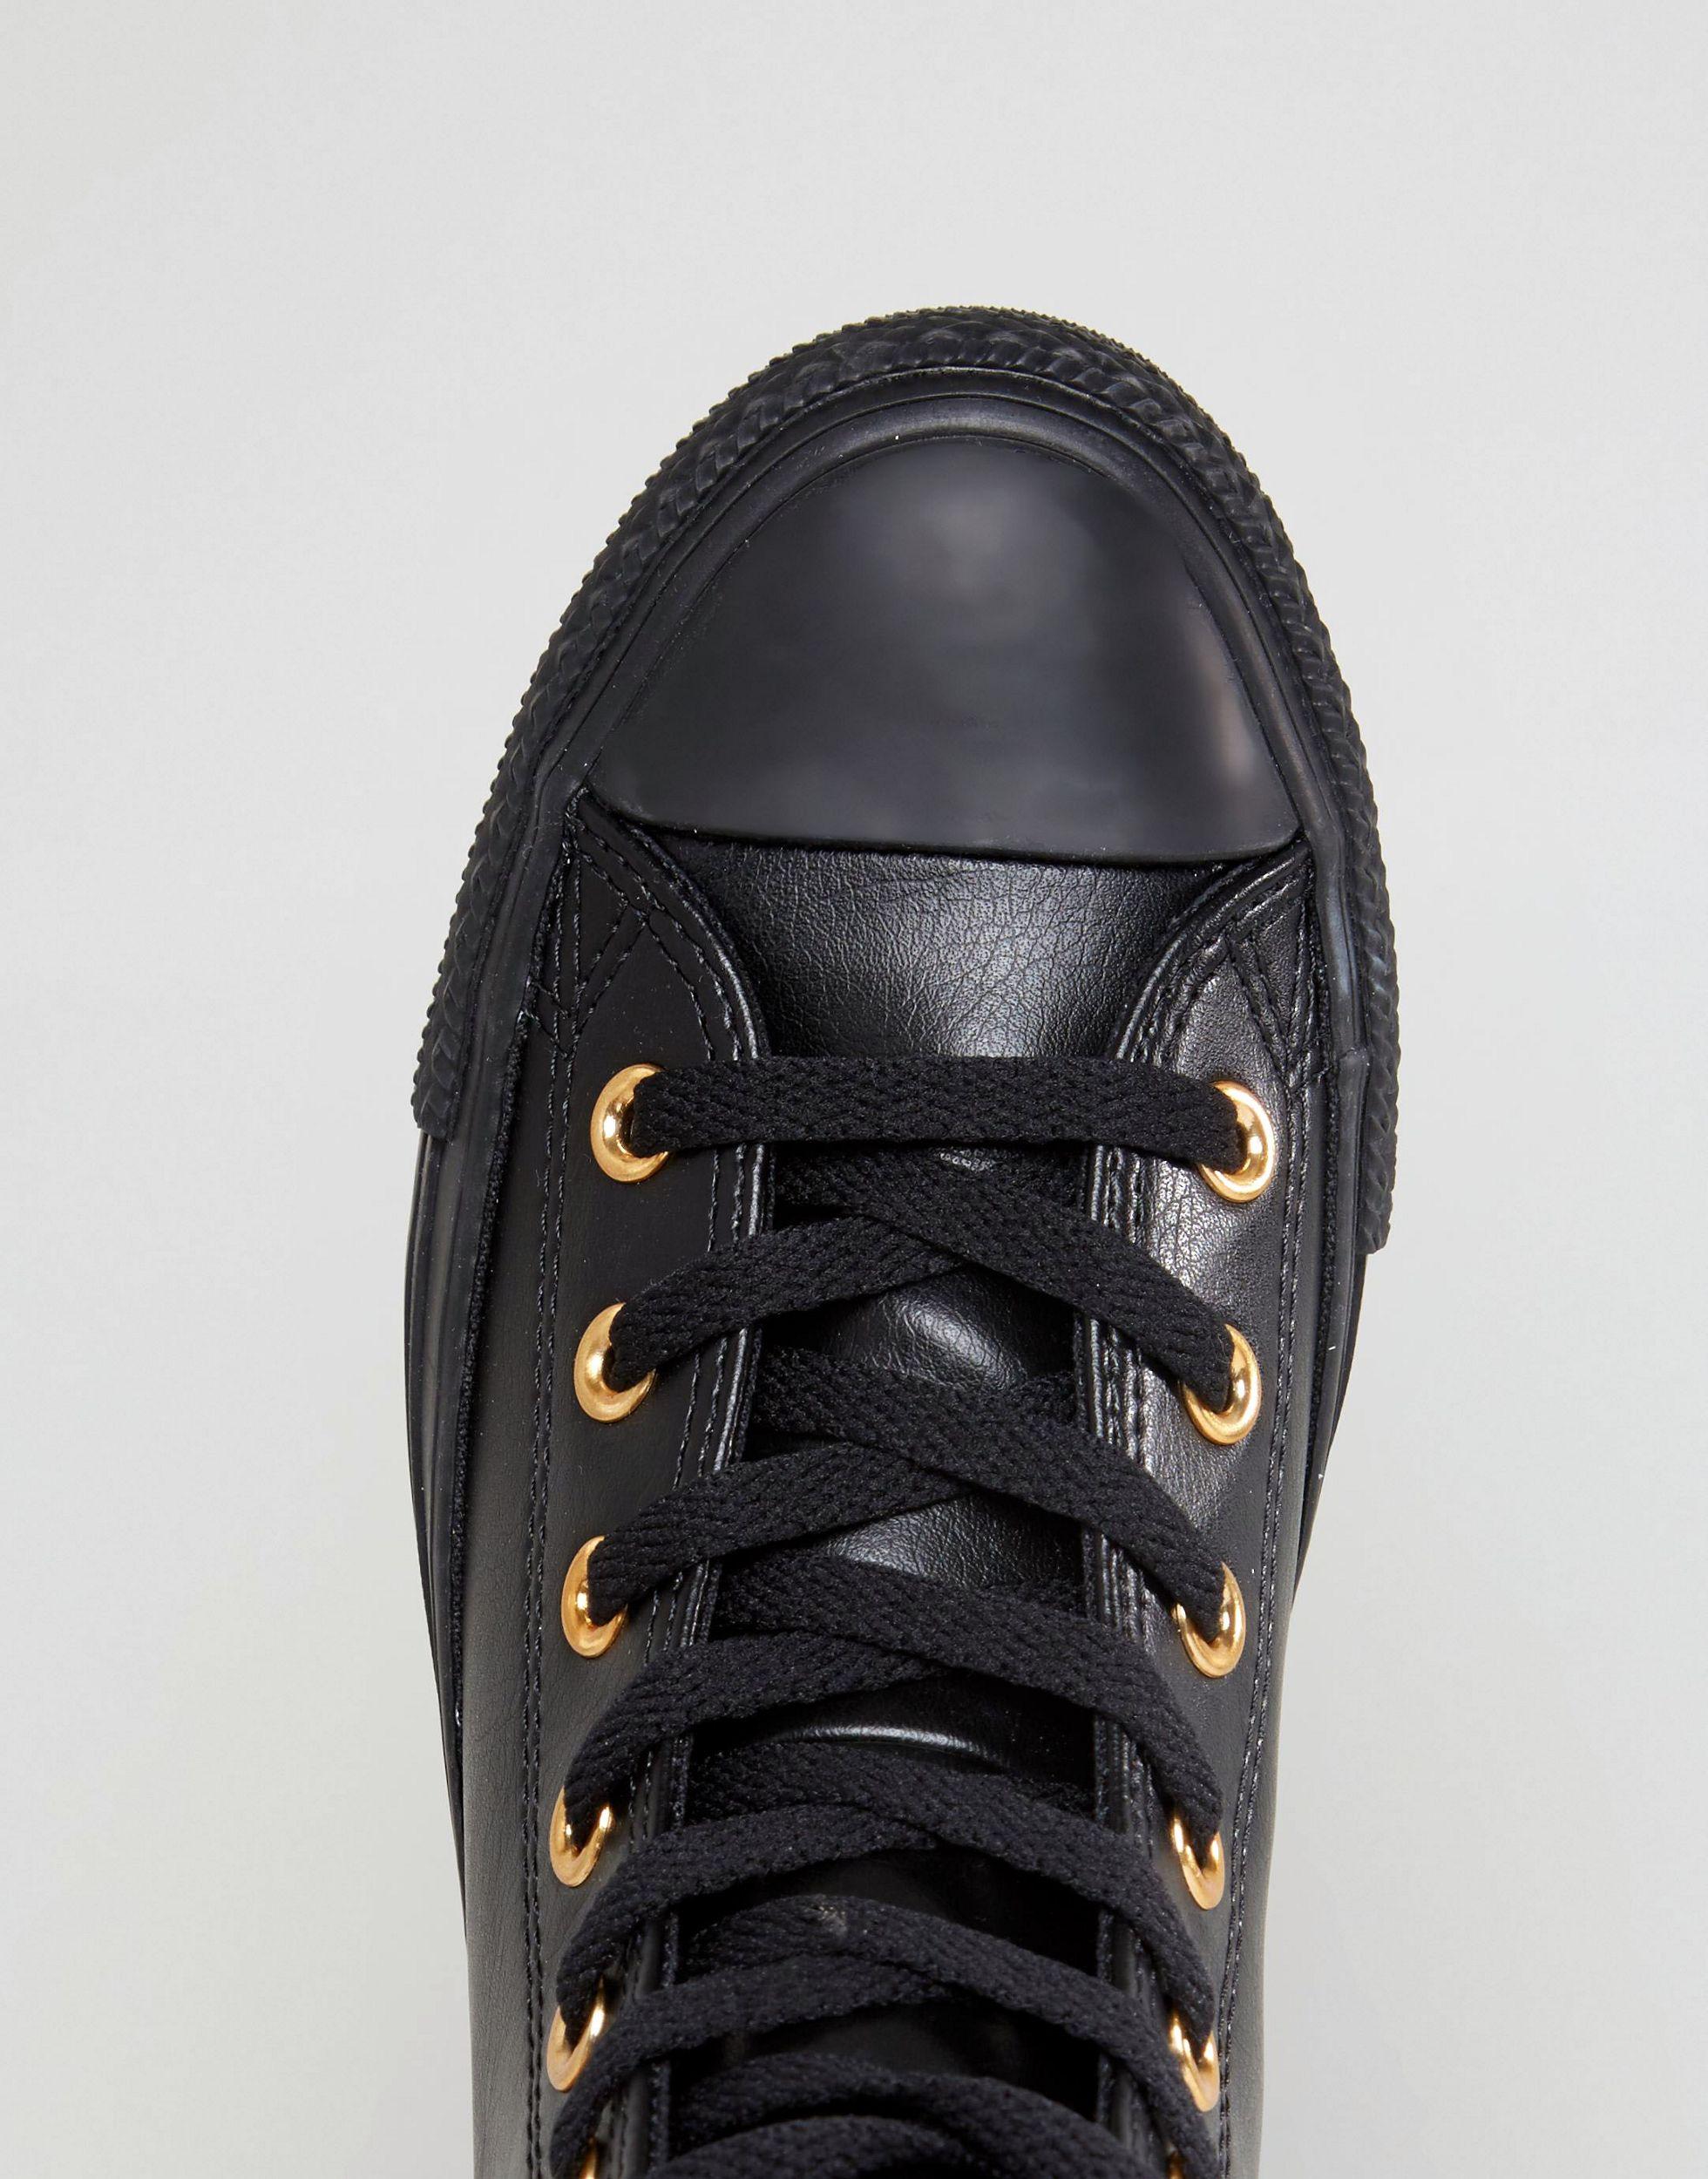 Gendanne Handel Transportere Converse Chuck Taylor Hi Top Sneakers In Black With Gold Eyelets | Lyst